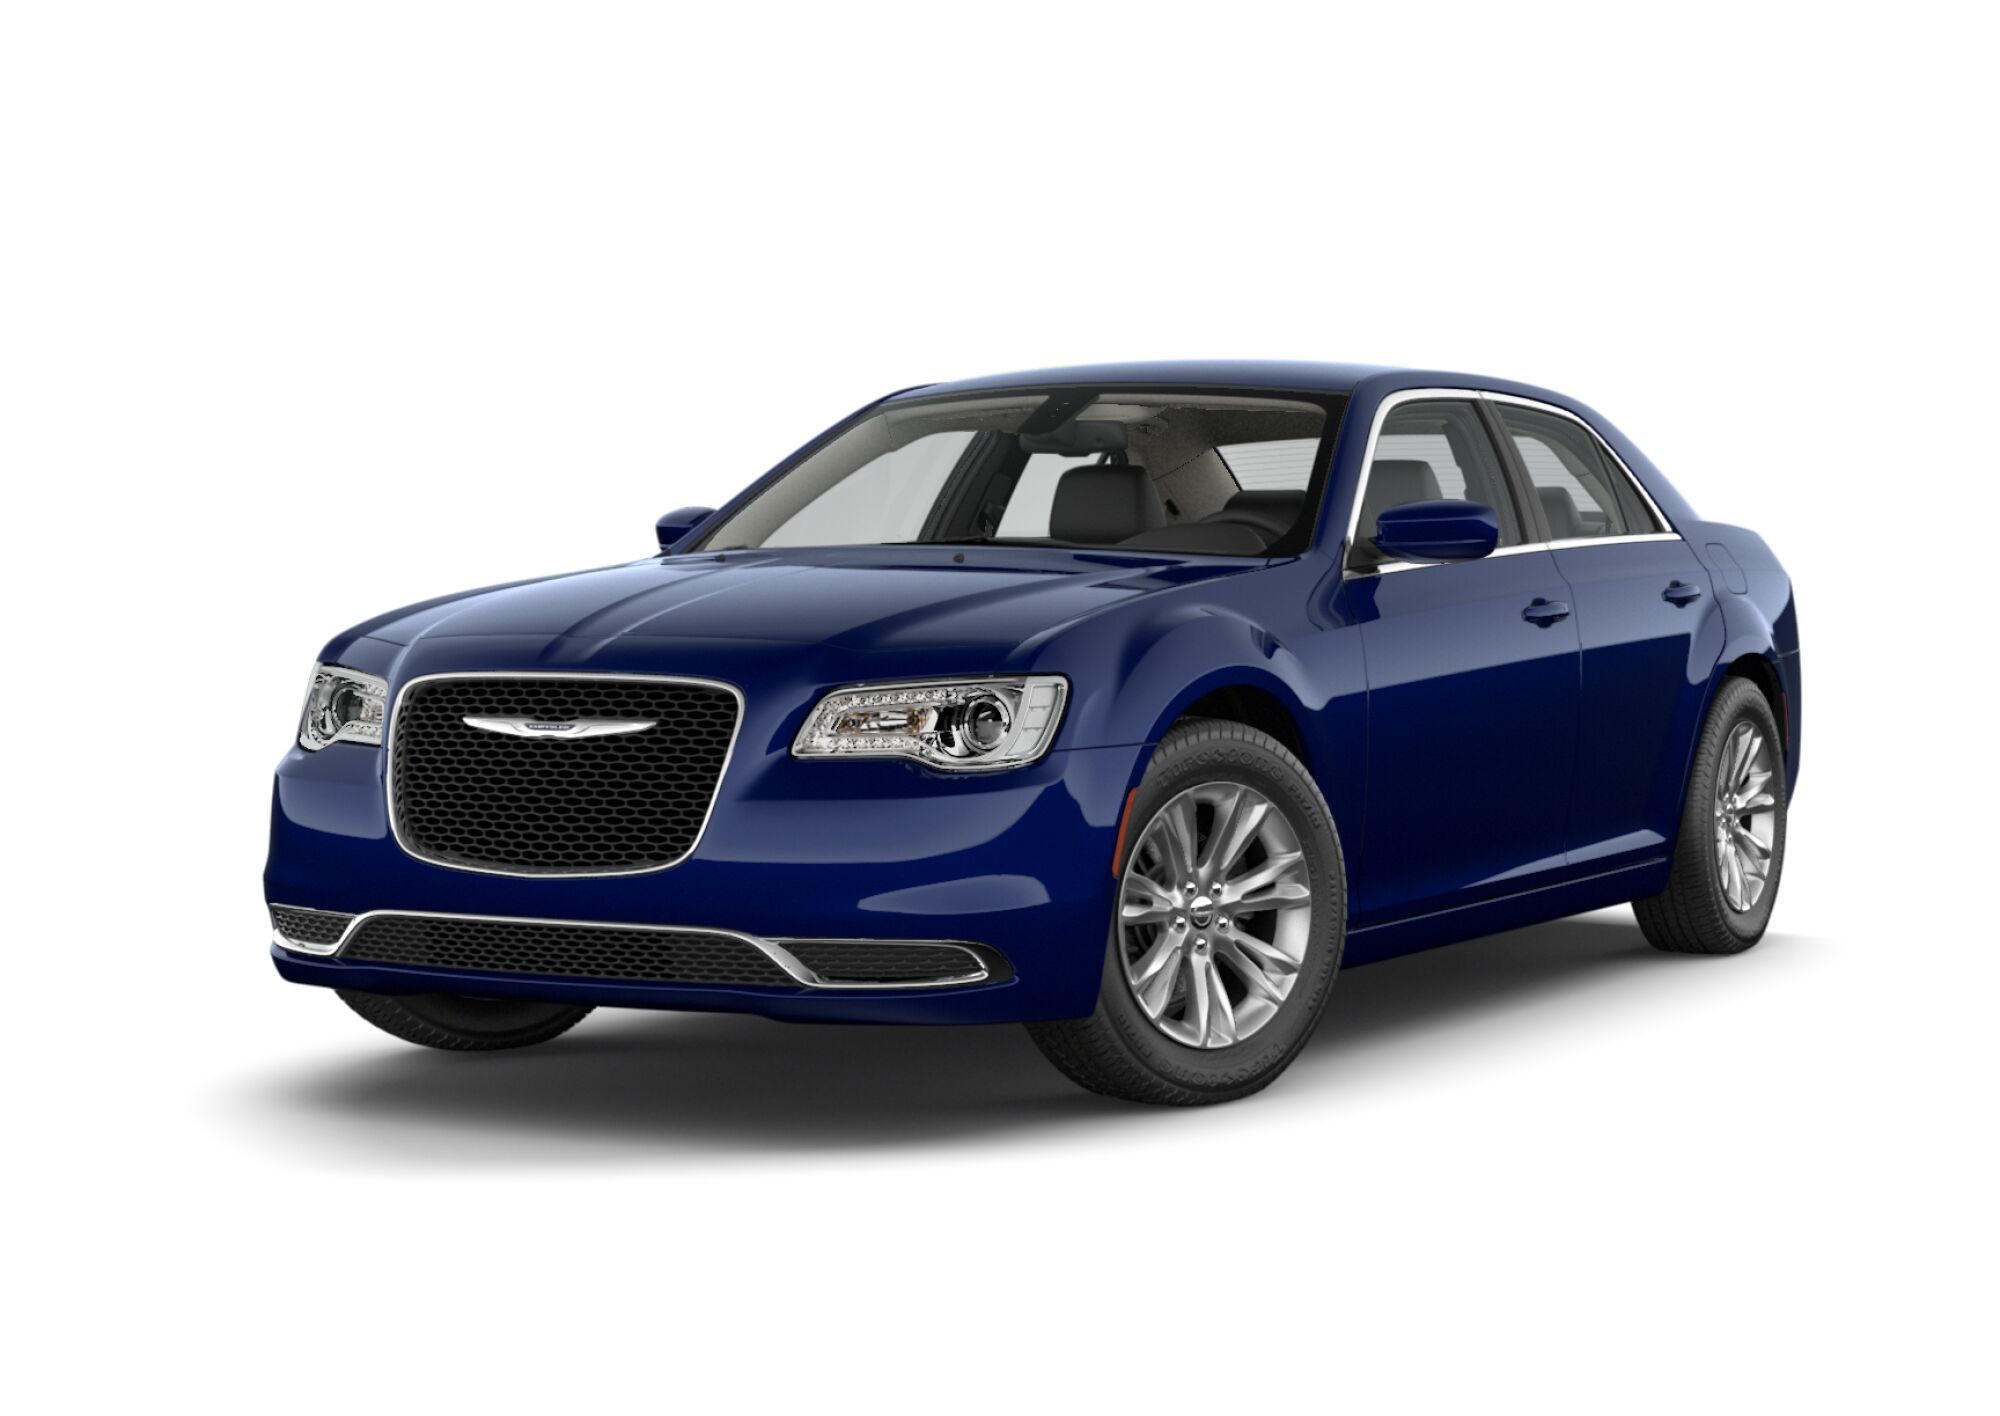 2021 Chrysler 300 Touring L Full Specs Features And Price Carbuzz